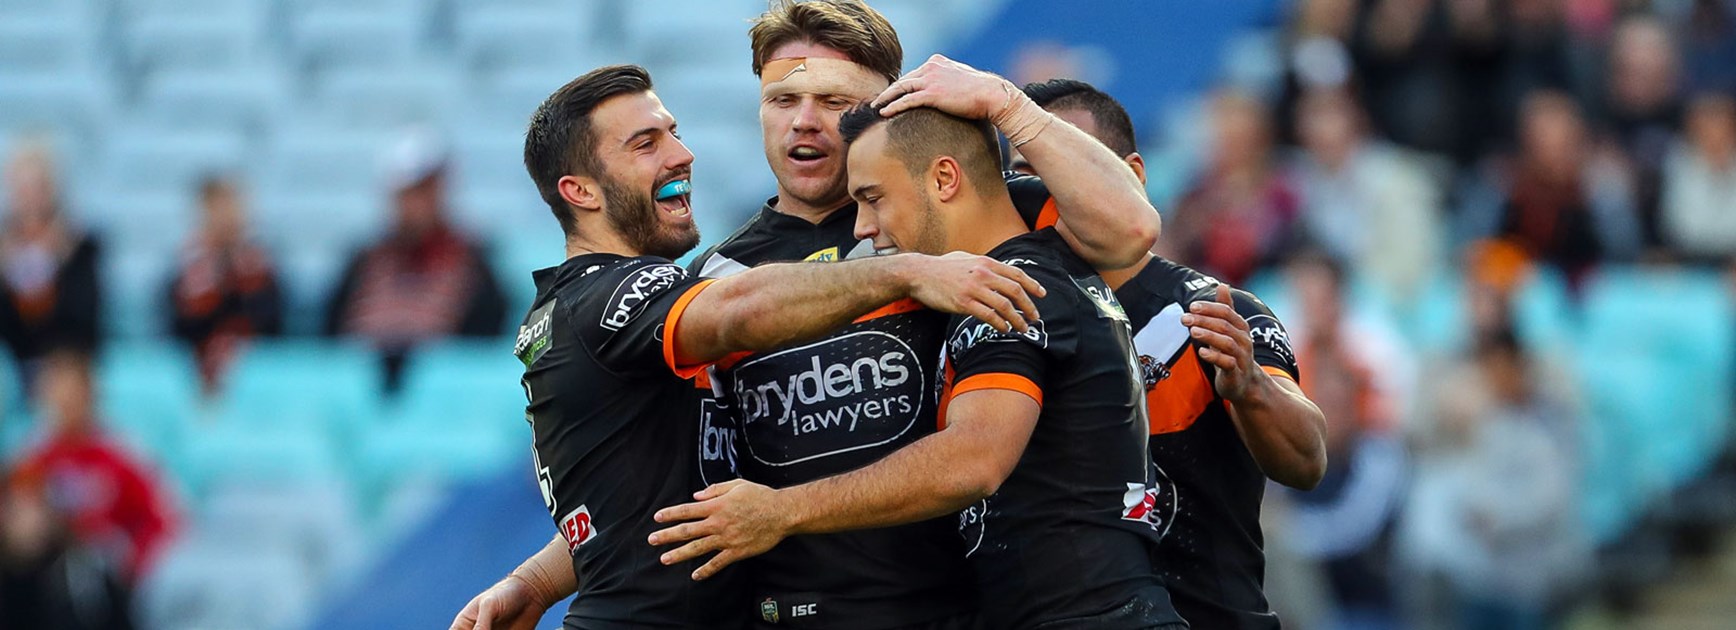 Tigers players celebrate against the Dragons in Round 20.